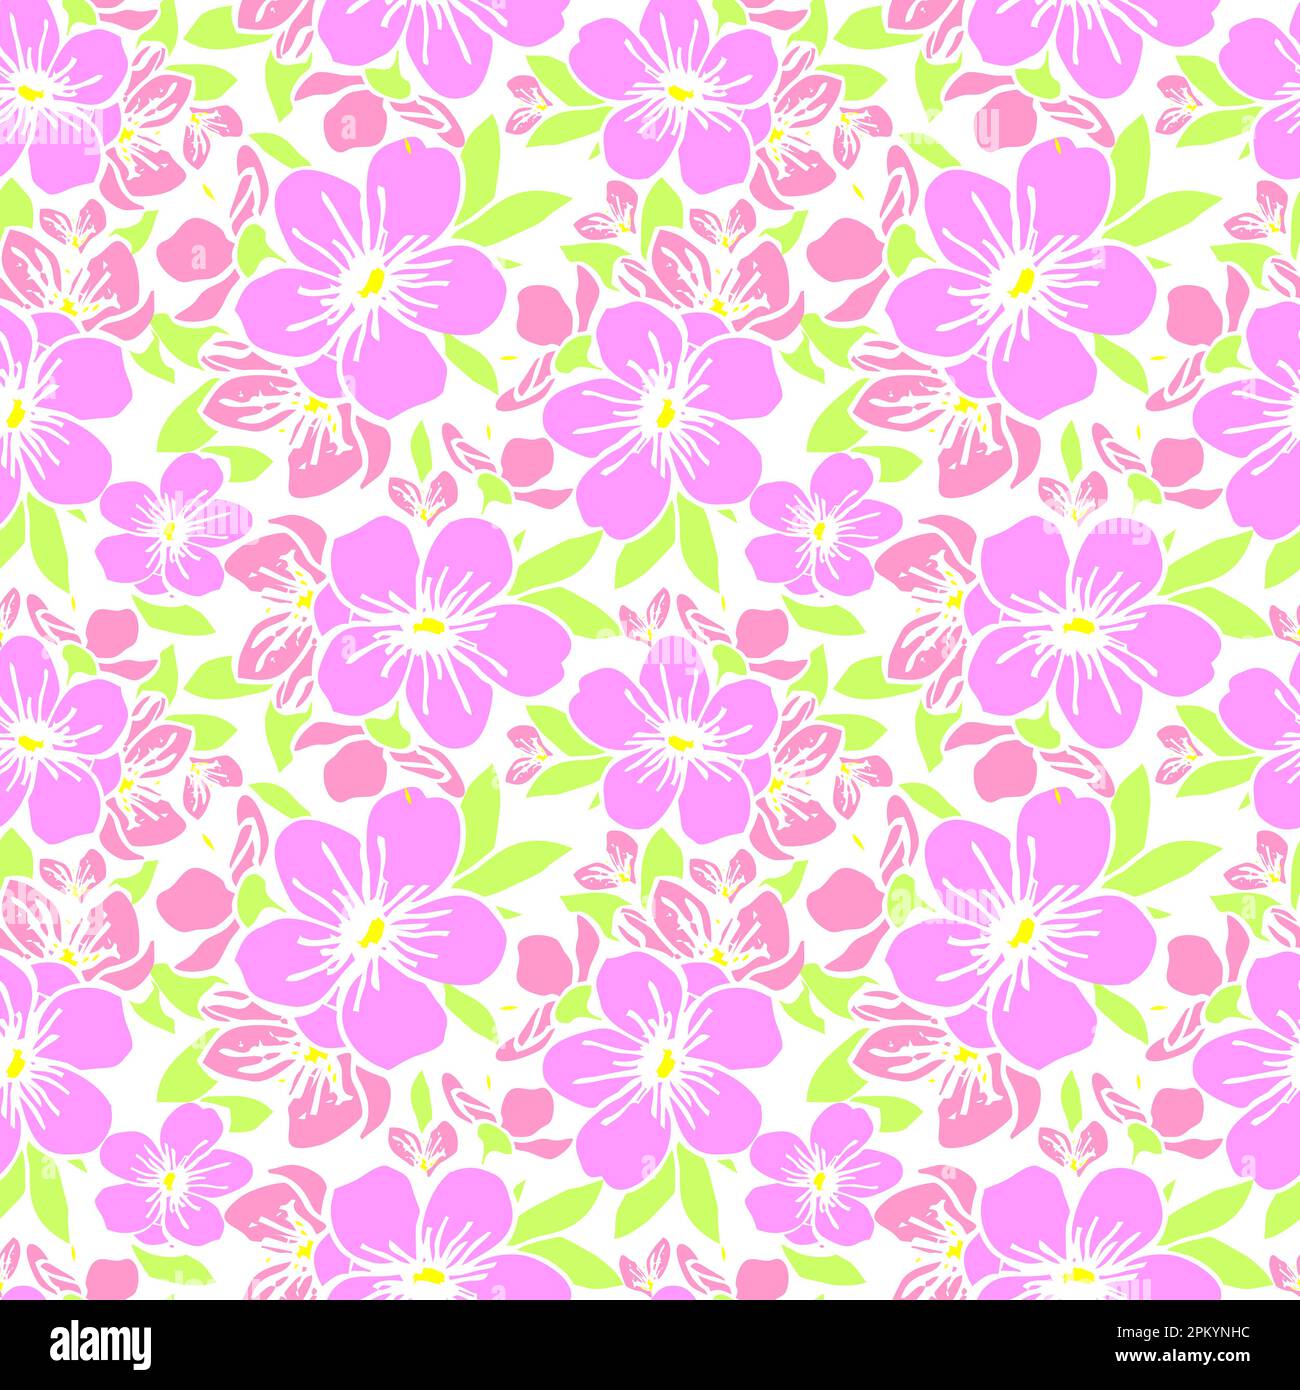 seamless pattern of pink silhouettes of flowers on a white background, texture, design Stock Photo